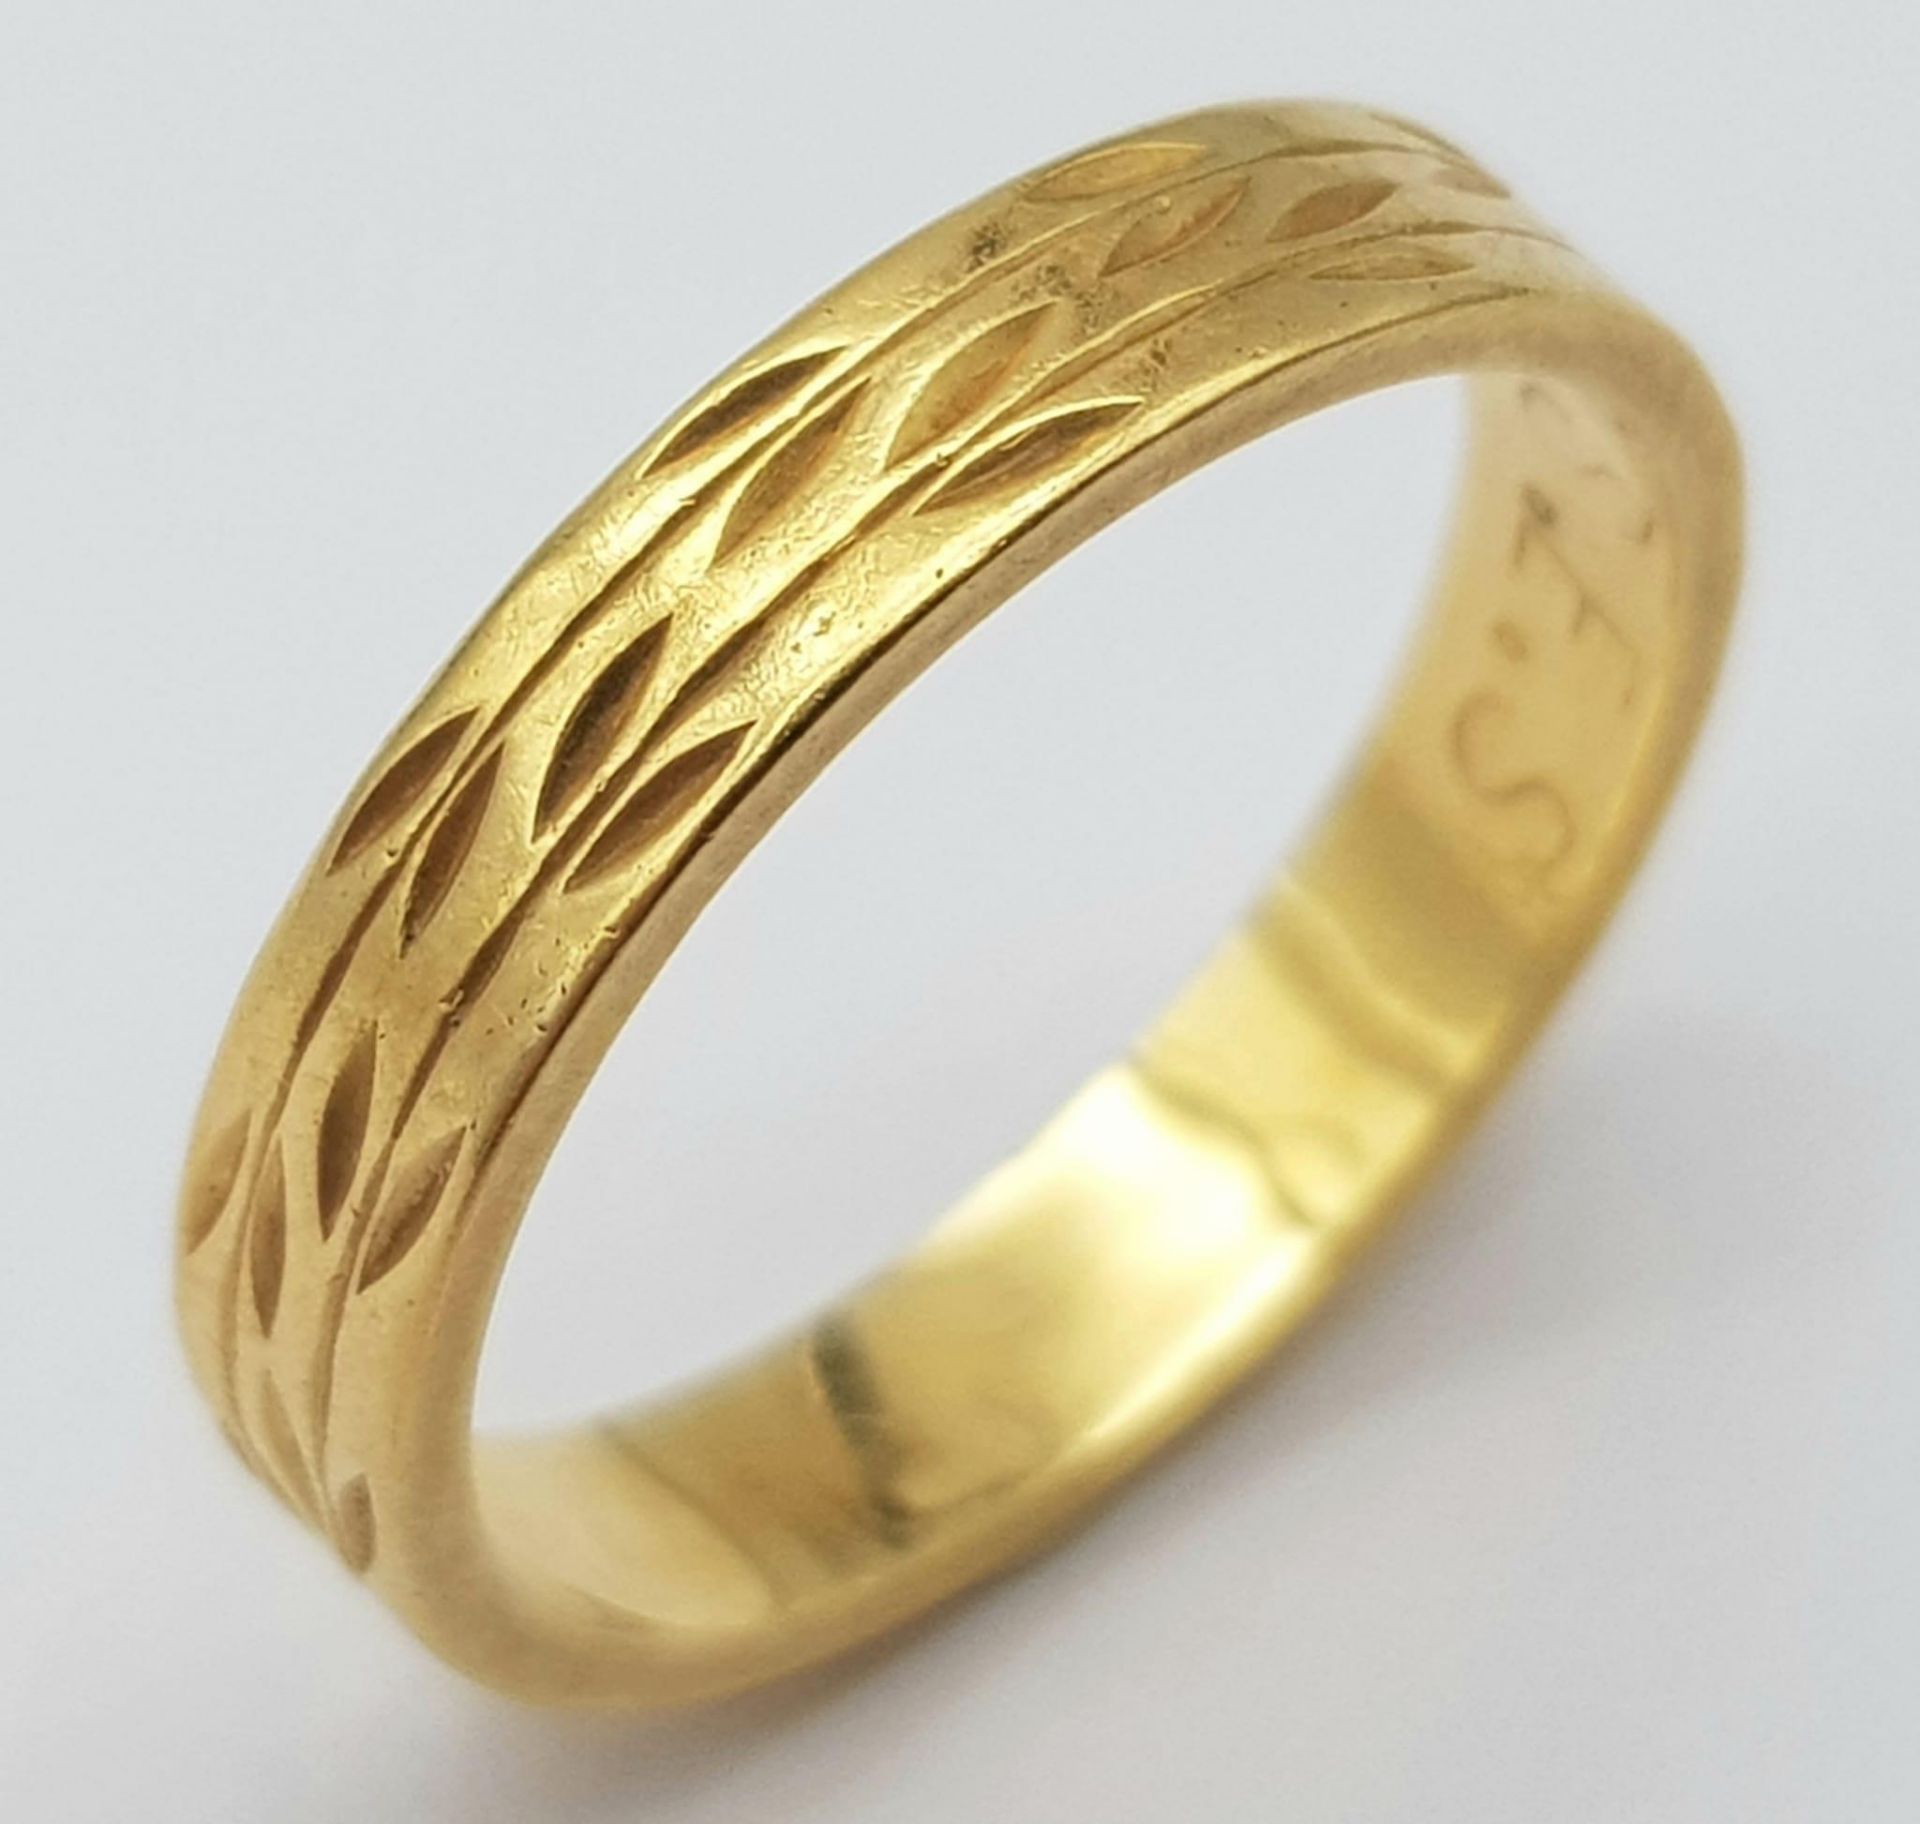 An 18K Yellow Gold Band Ring. 3mm width. Size H. 2.4g weight.